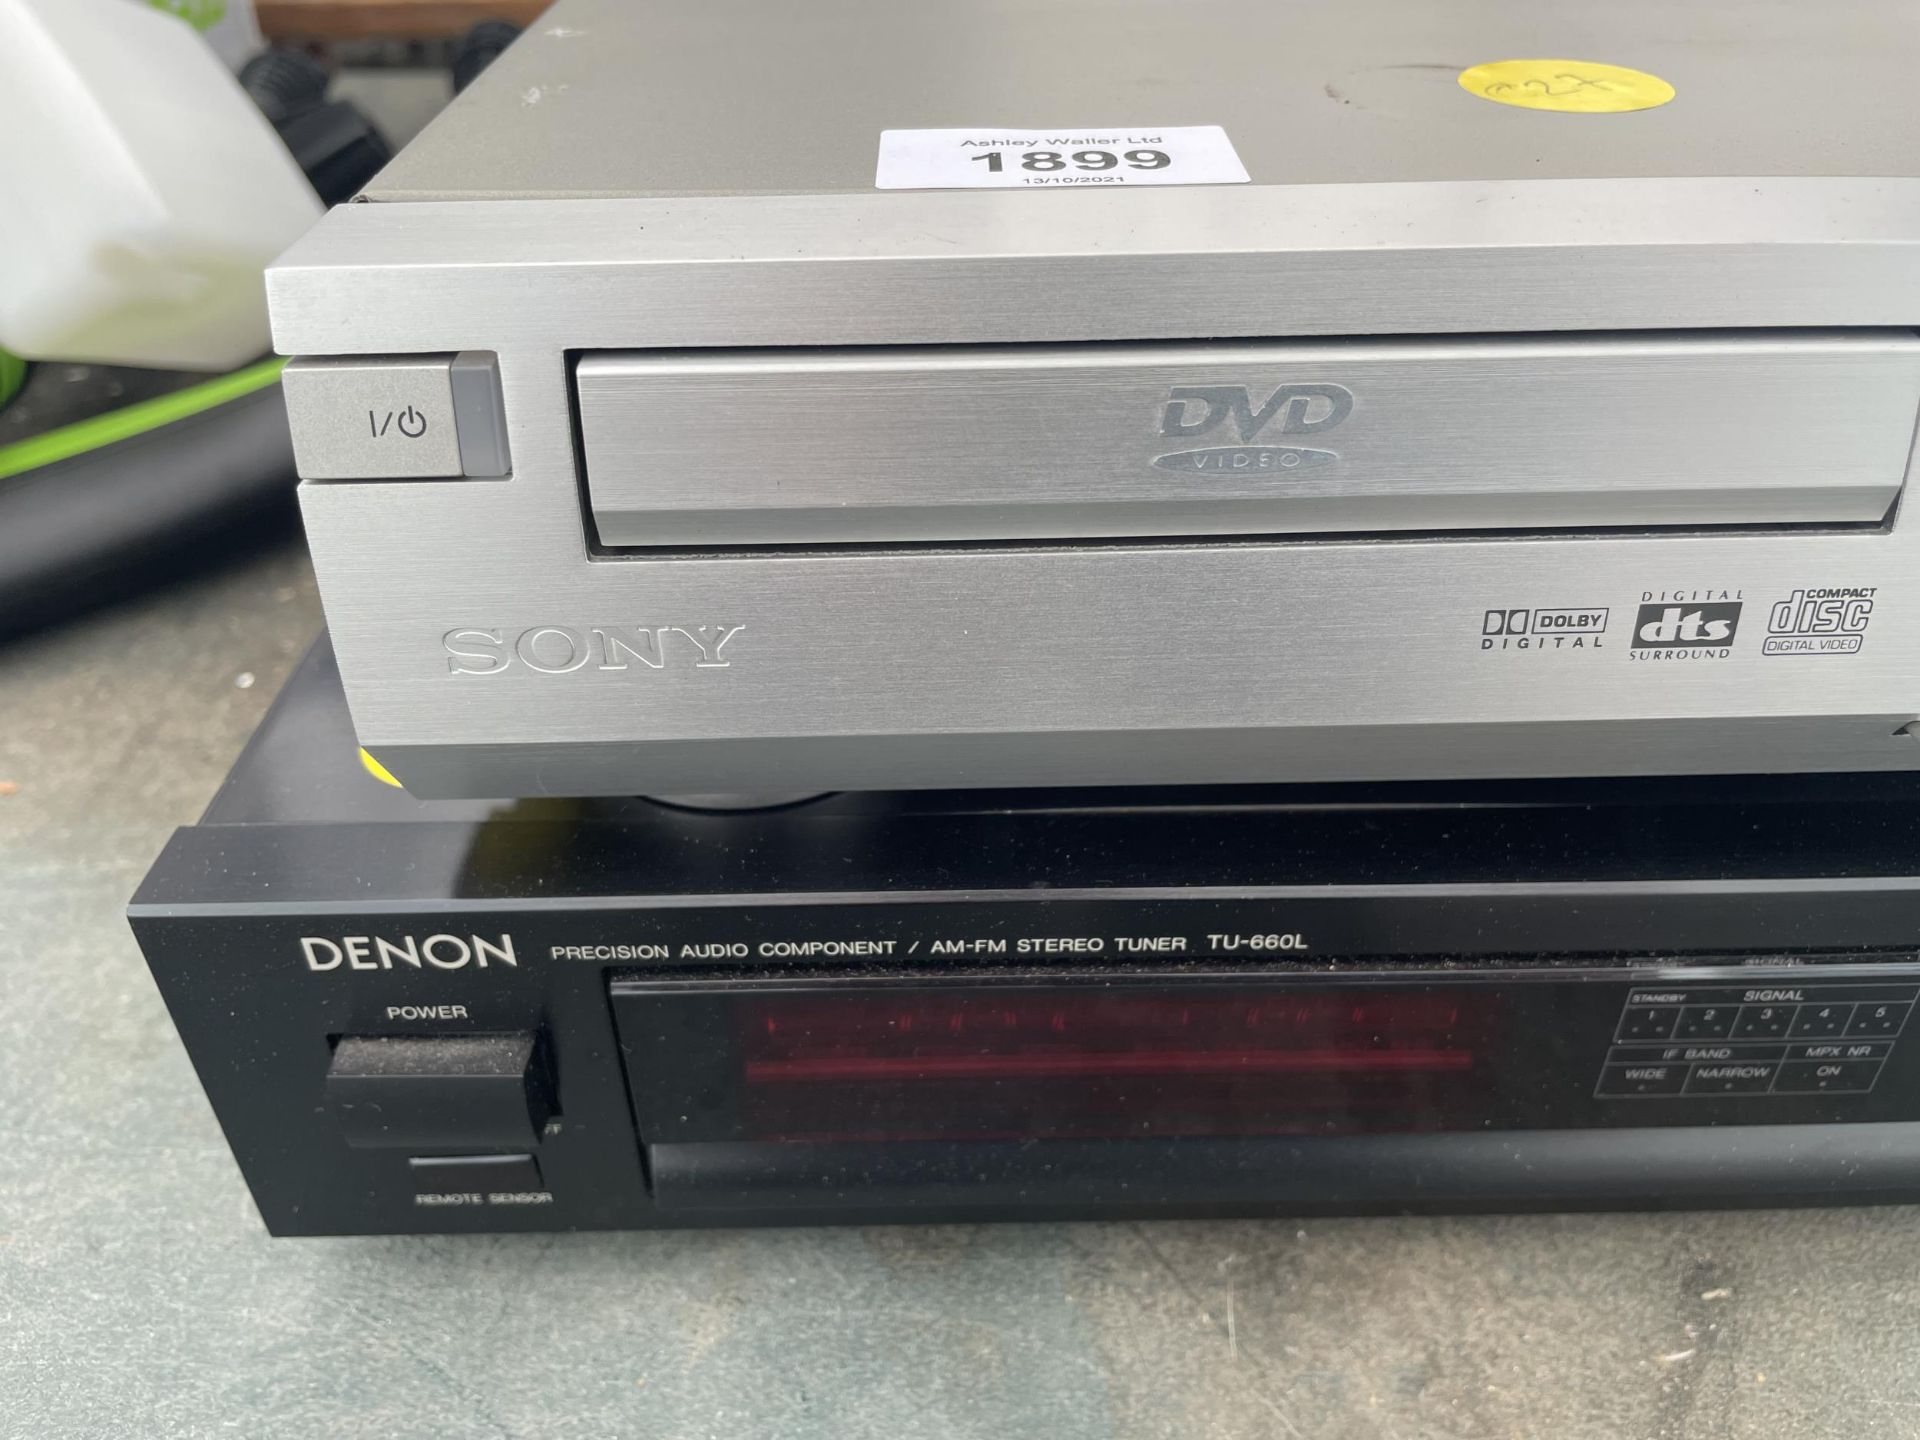 A SLONY DVD PLAYER AND A DENON TUNER - Image 2 of 2